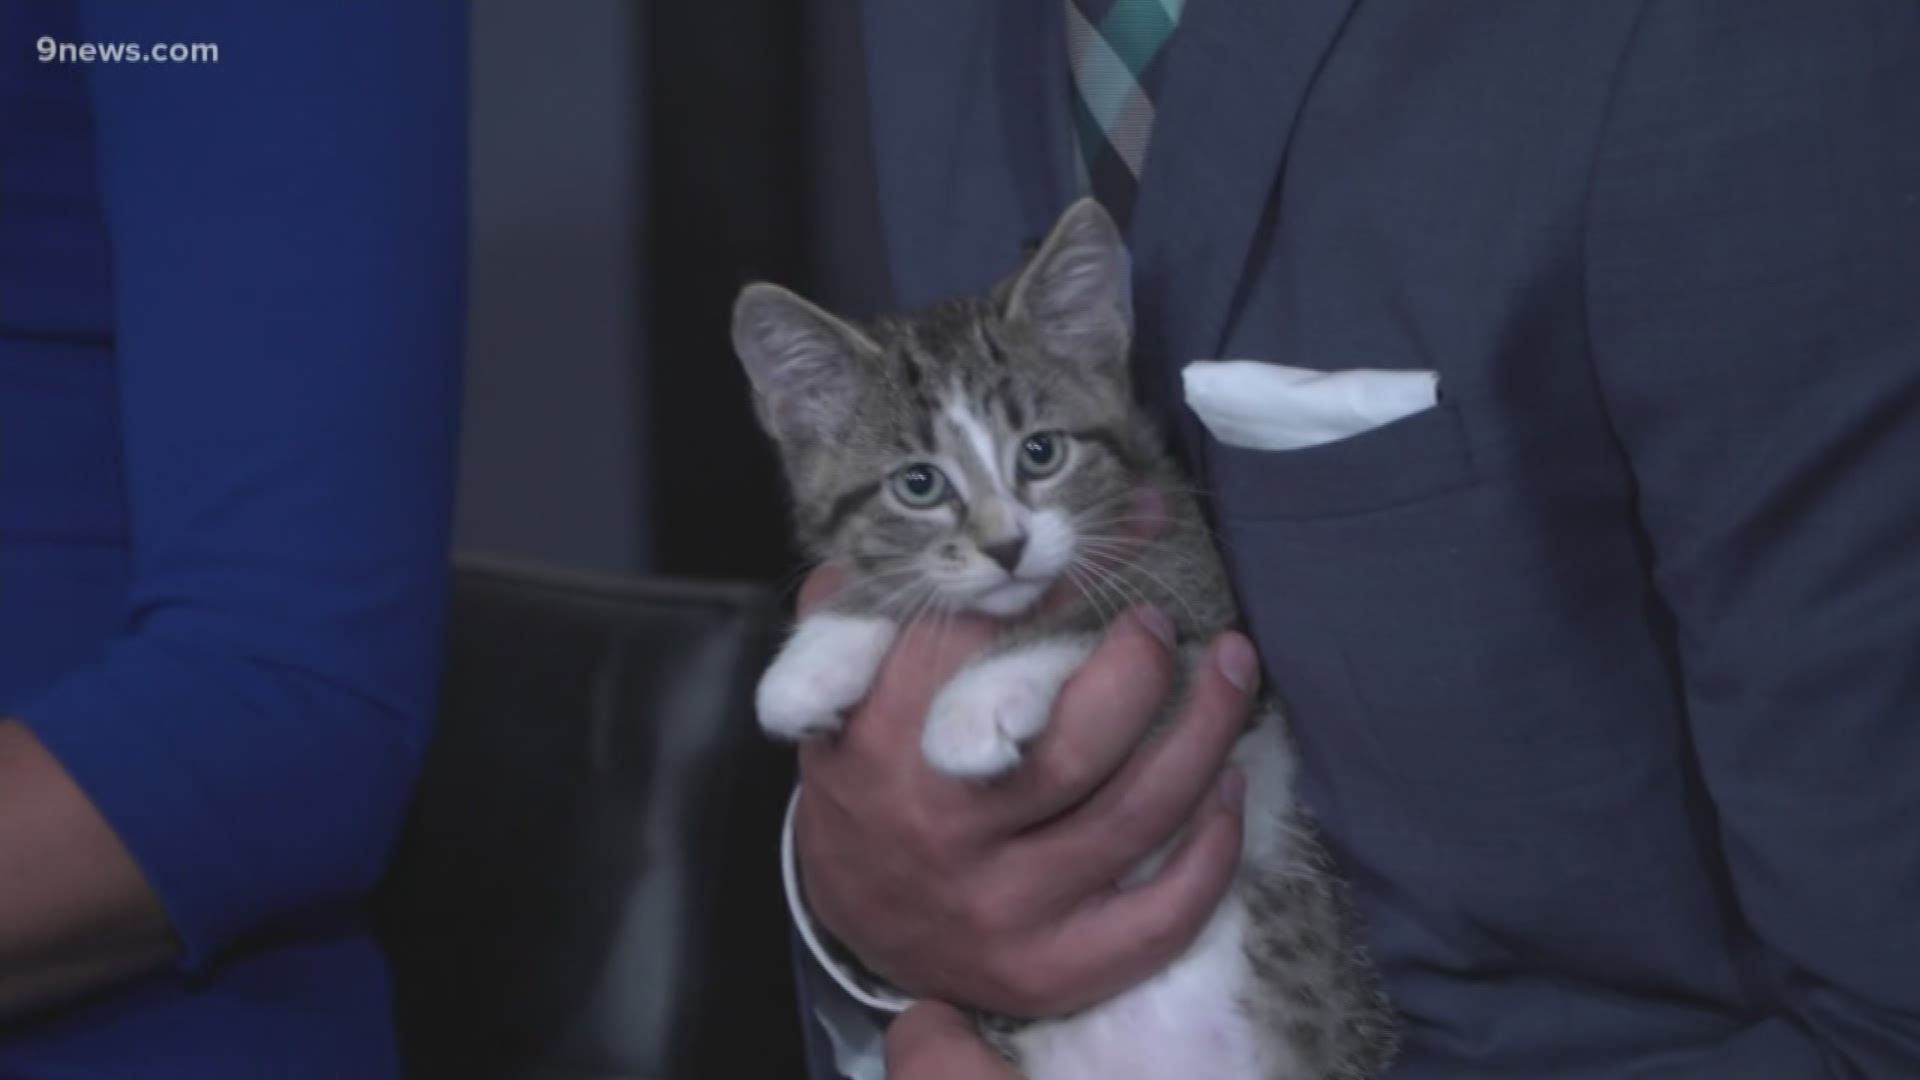 Peanut and Edamame, two kittens named after road trip snacks, are searching for a new home.